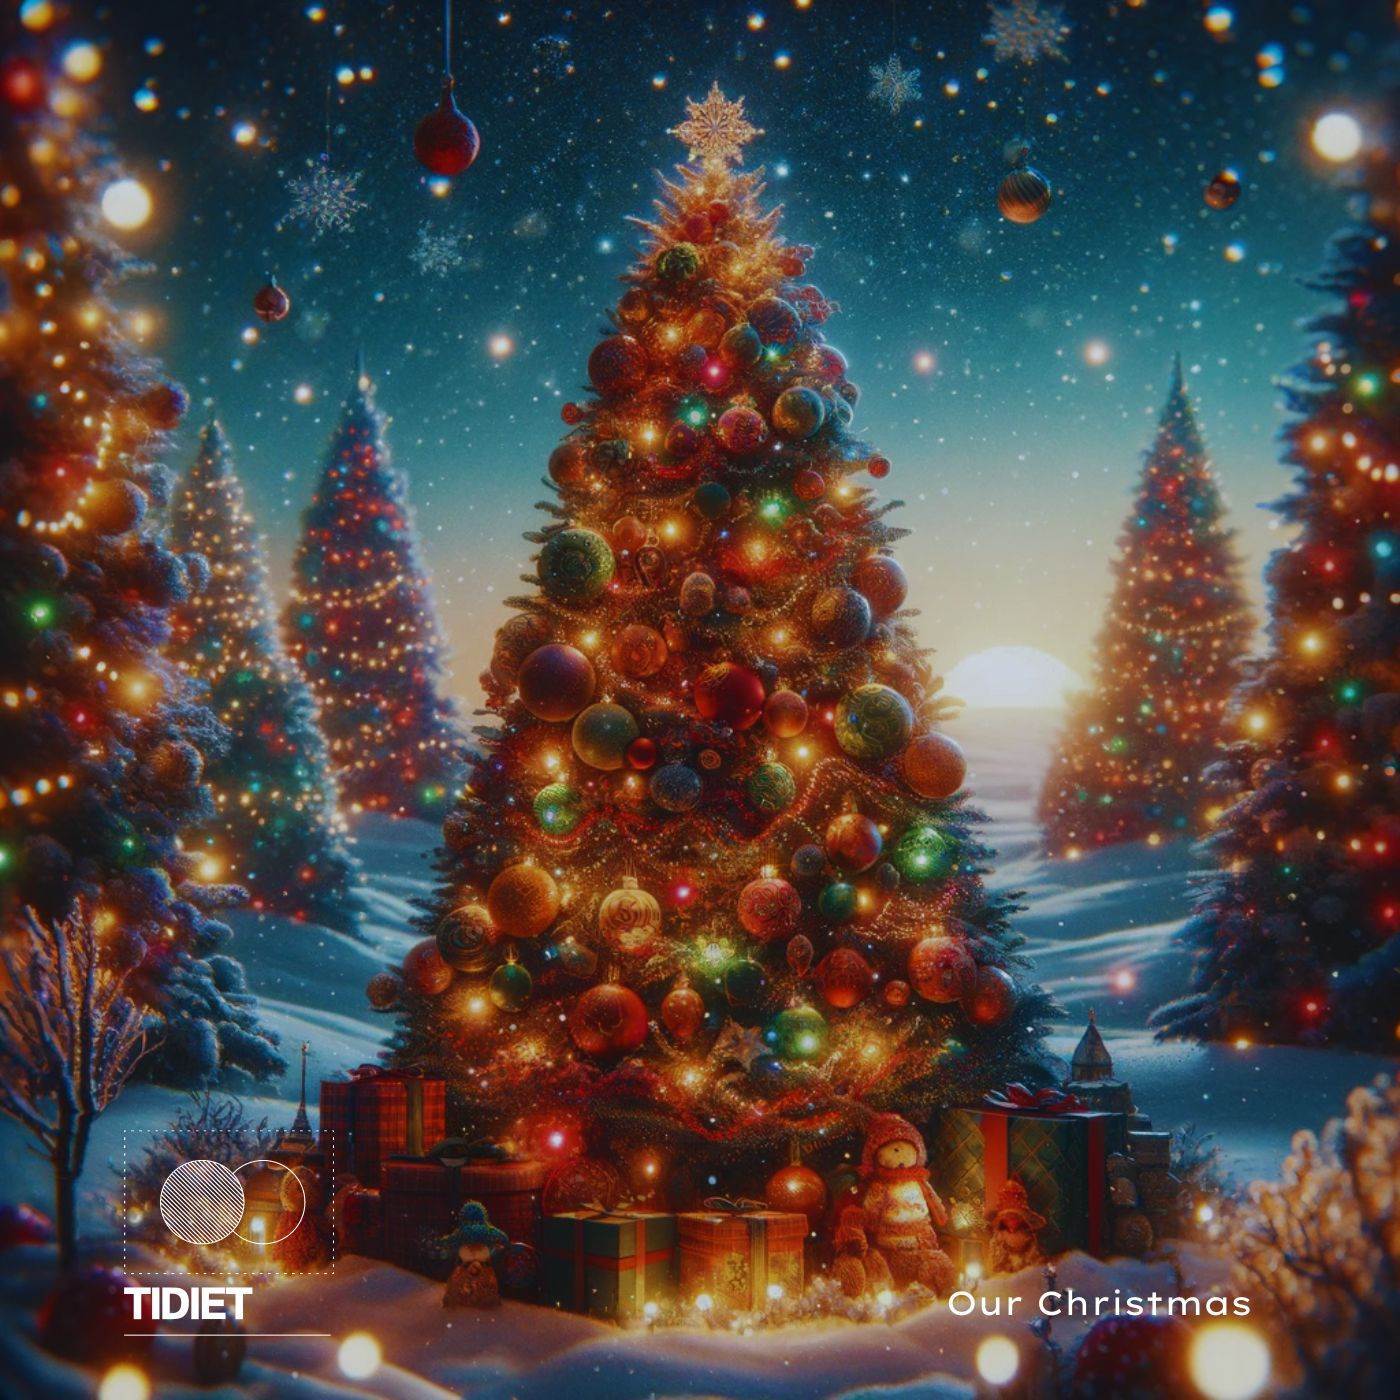 Tidiet - Our Christmas (Slowed)